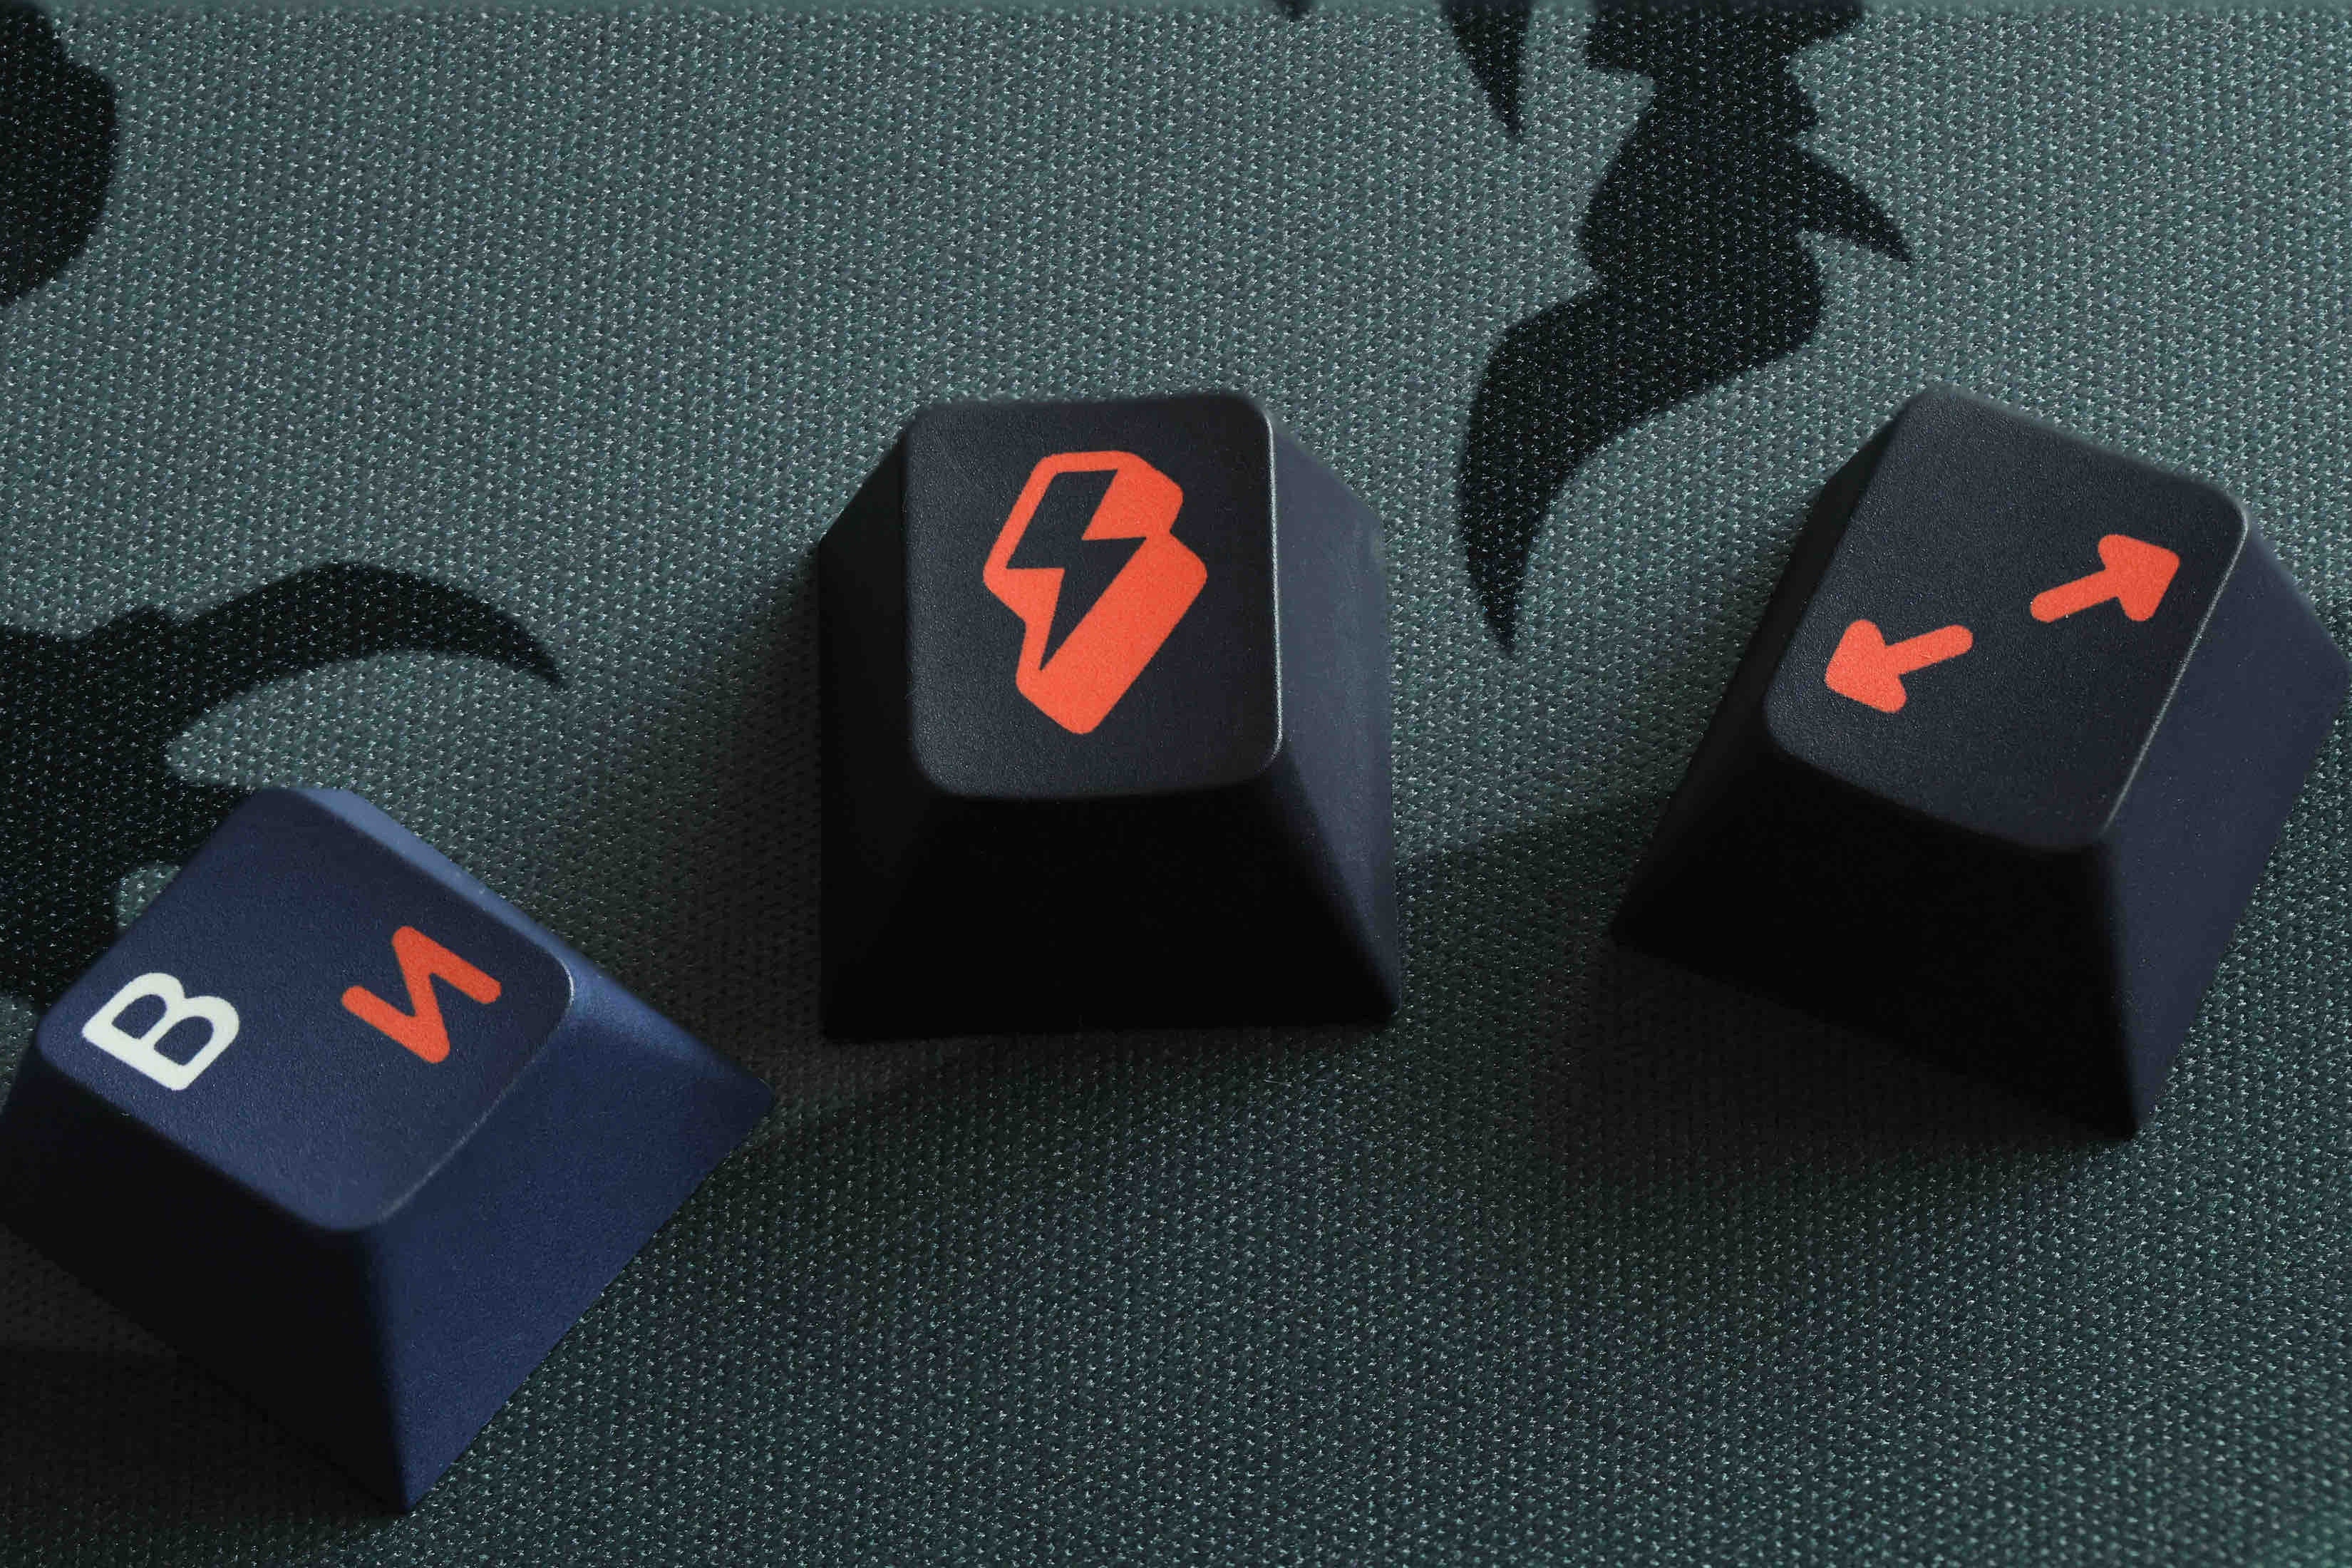 [Group Buy] Fast Blue PBT Keycaps by Velocifire Tech - KeebsForAll